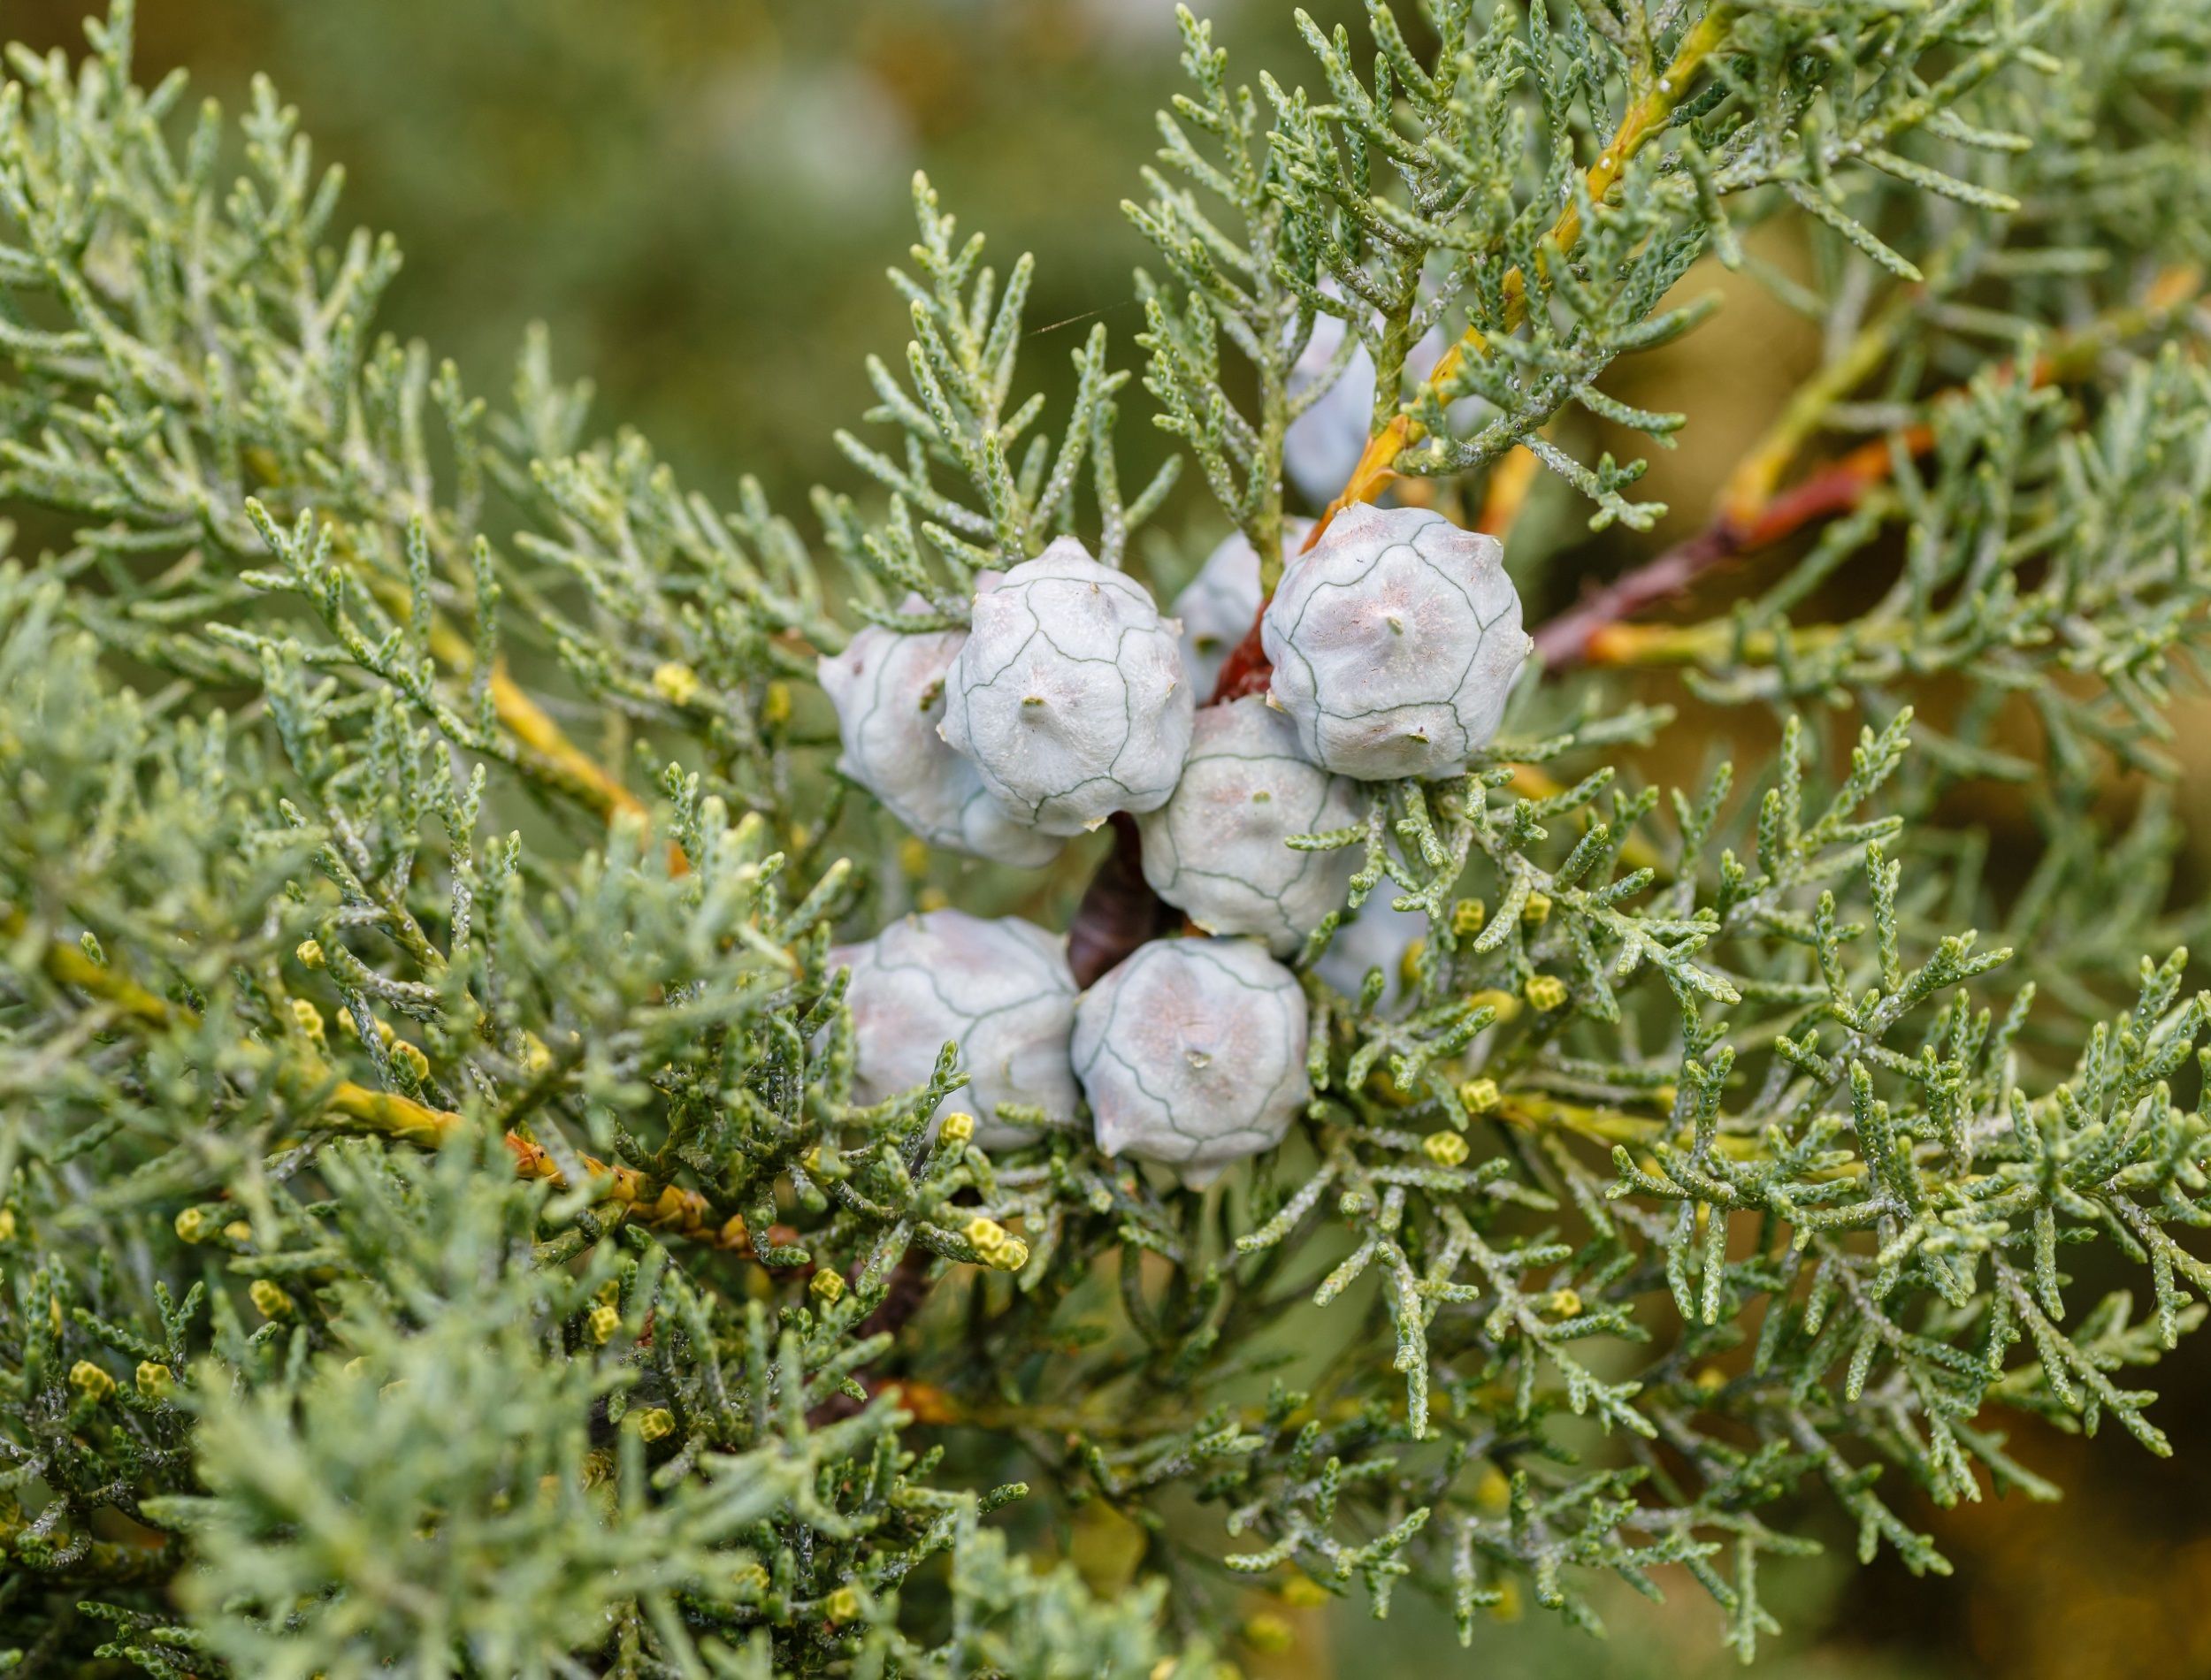 Cupressus arizonica. Pinecones and twigs with leaves Arizona Cypress.